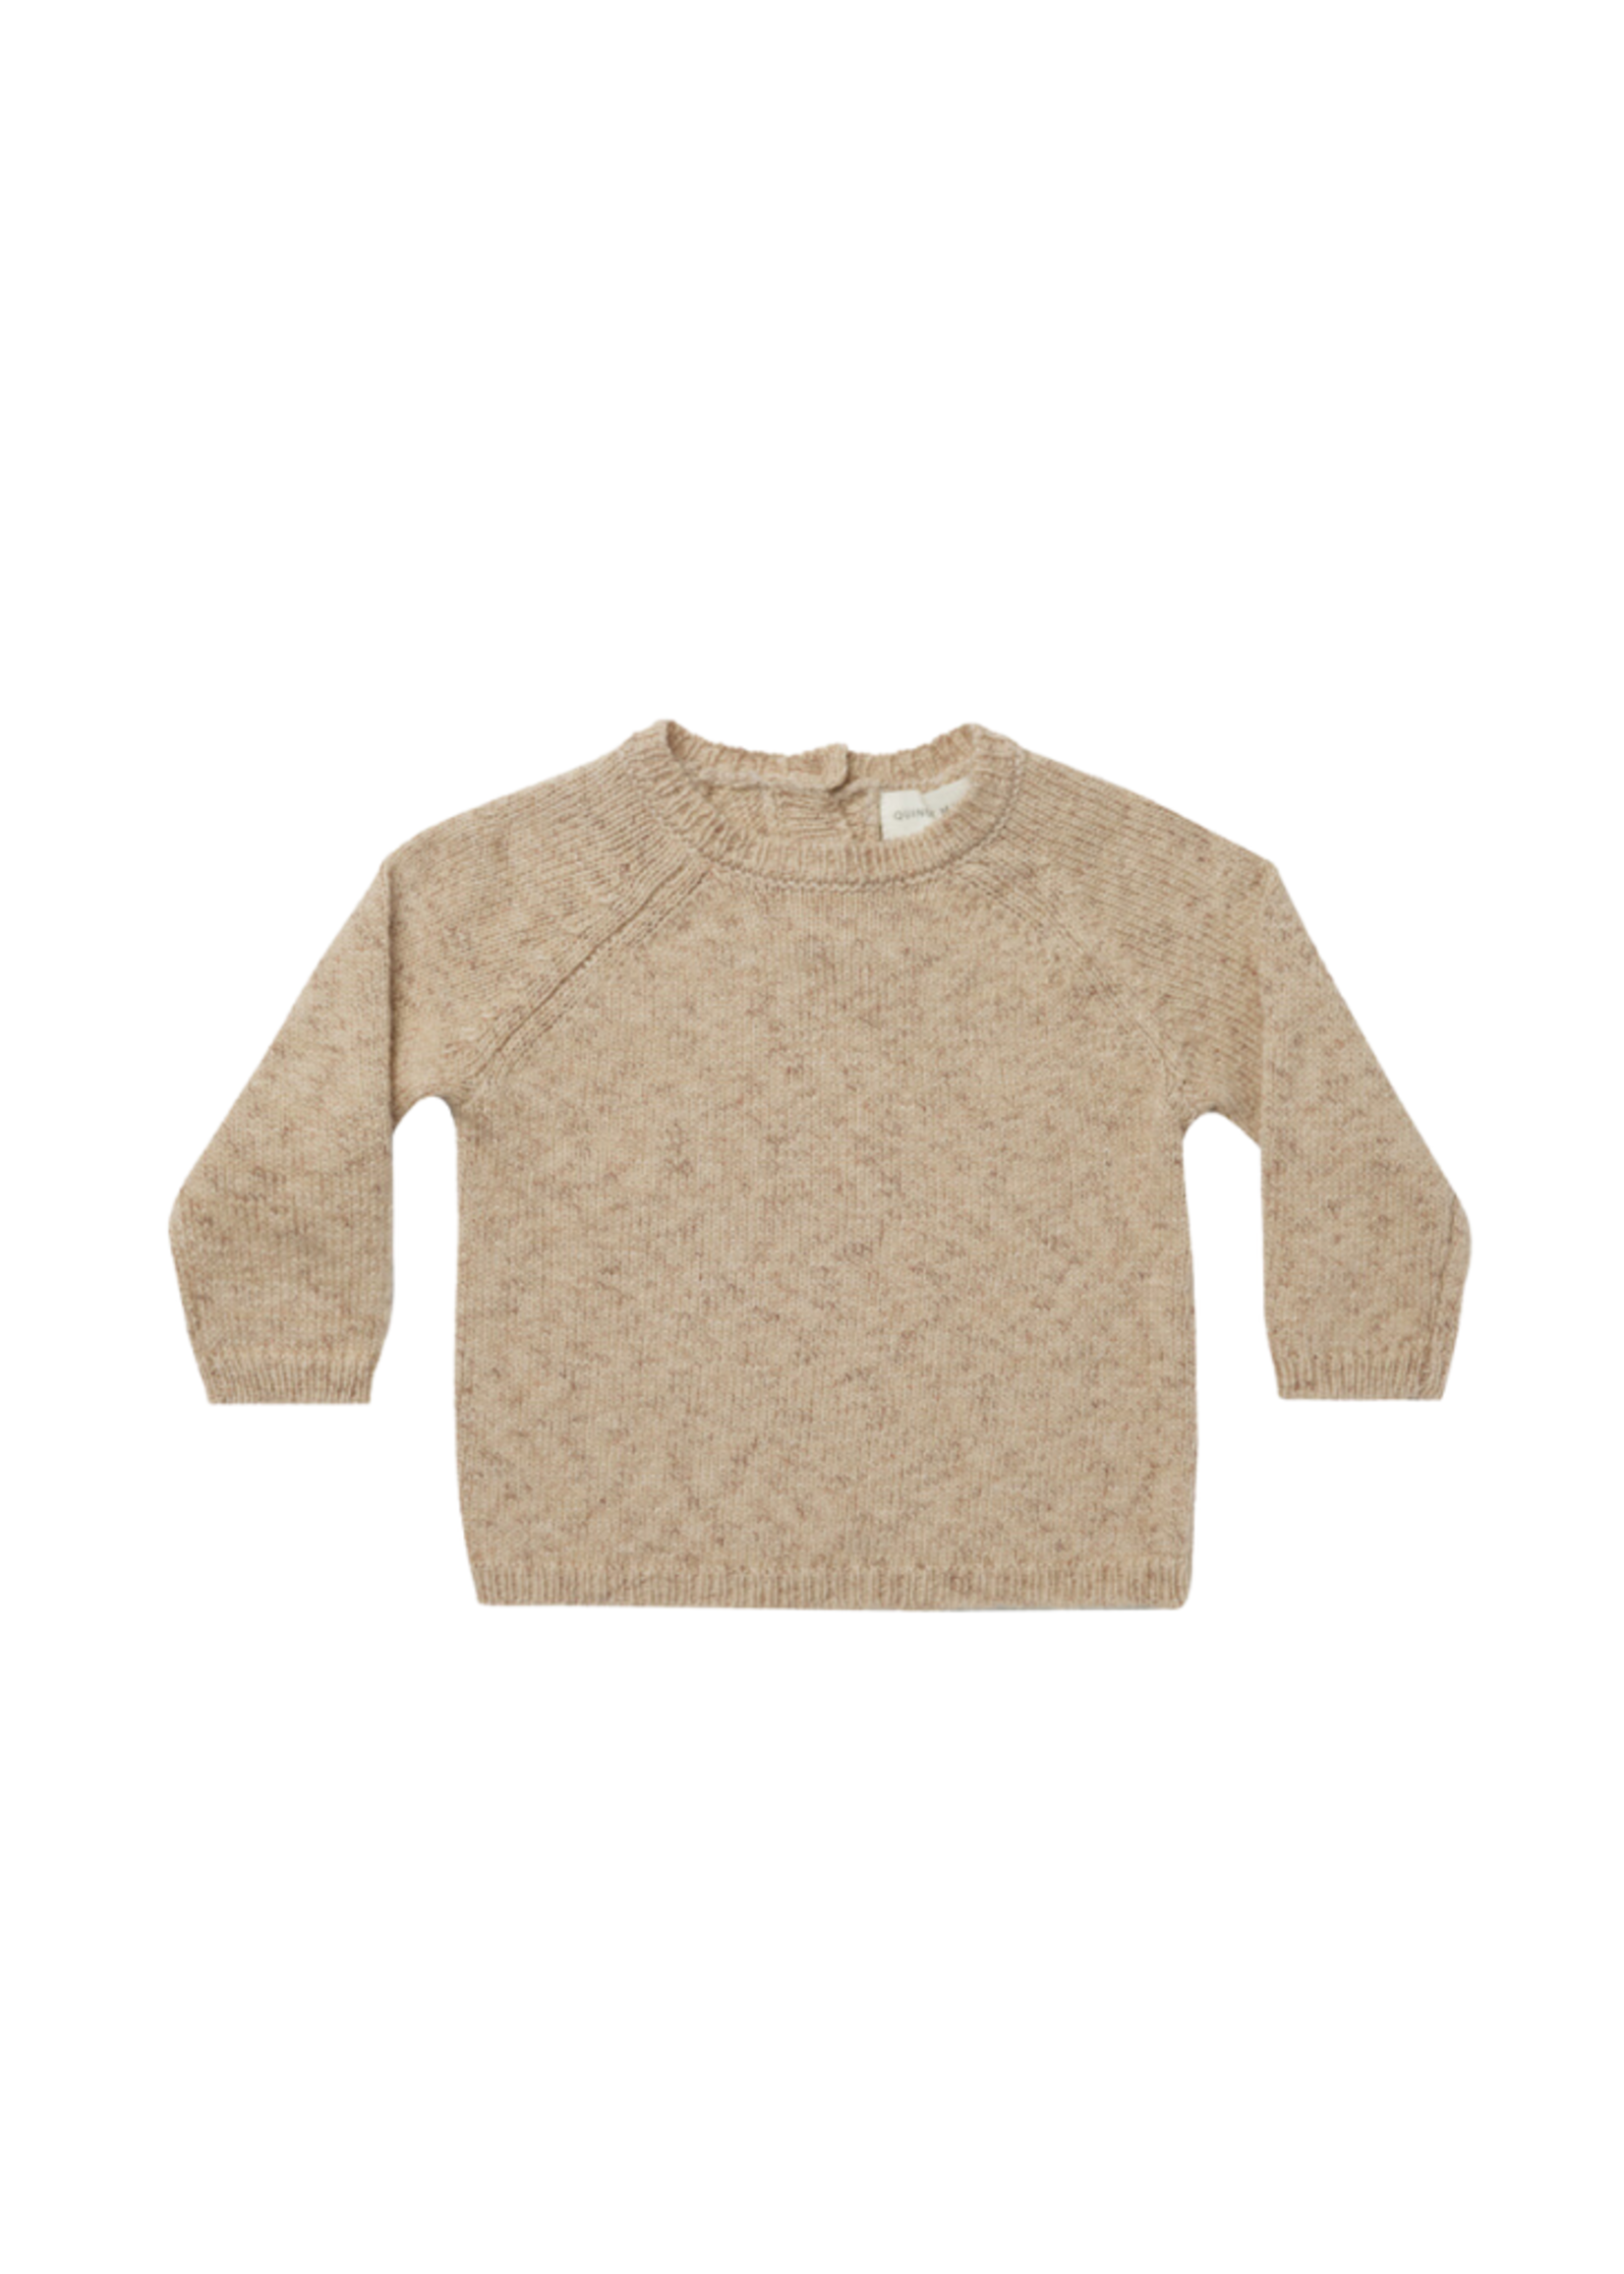 Quincy Mae Speckled Knit Sweater - Latte